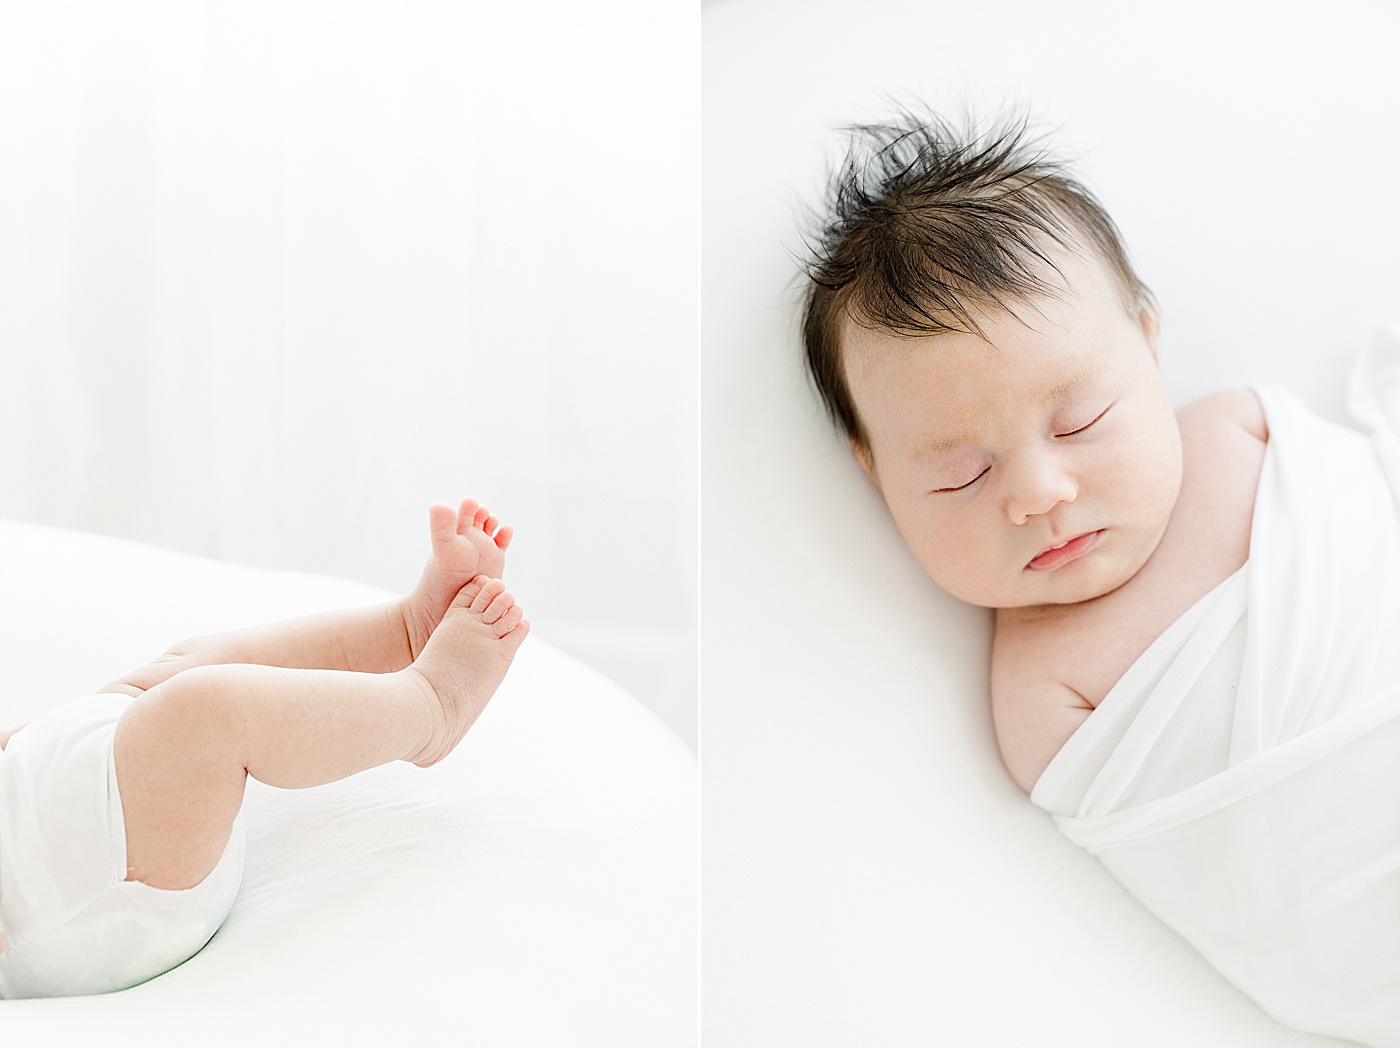 Newborn session for baby boy in studio in Westport, CT | Kristin Wood Photography